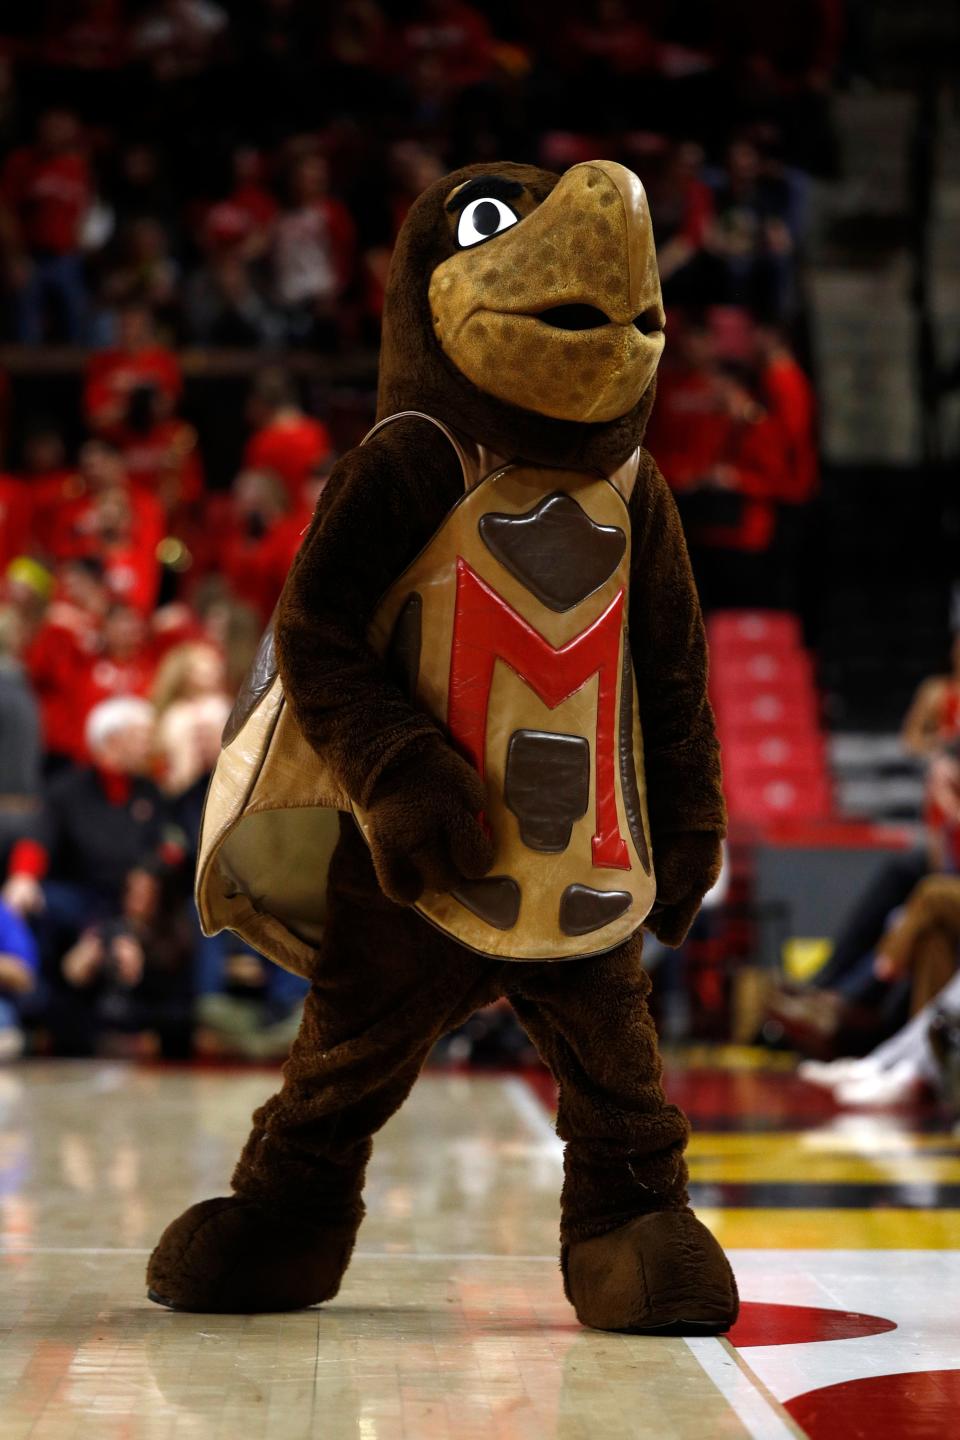 Maryland mascot Testudo walks on the court in the first half of an NCAA college basketball game between Maryland and Wisconsin, Monday, Jan. 14, 2019, in College Park, Md.